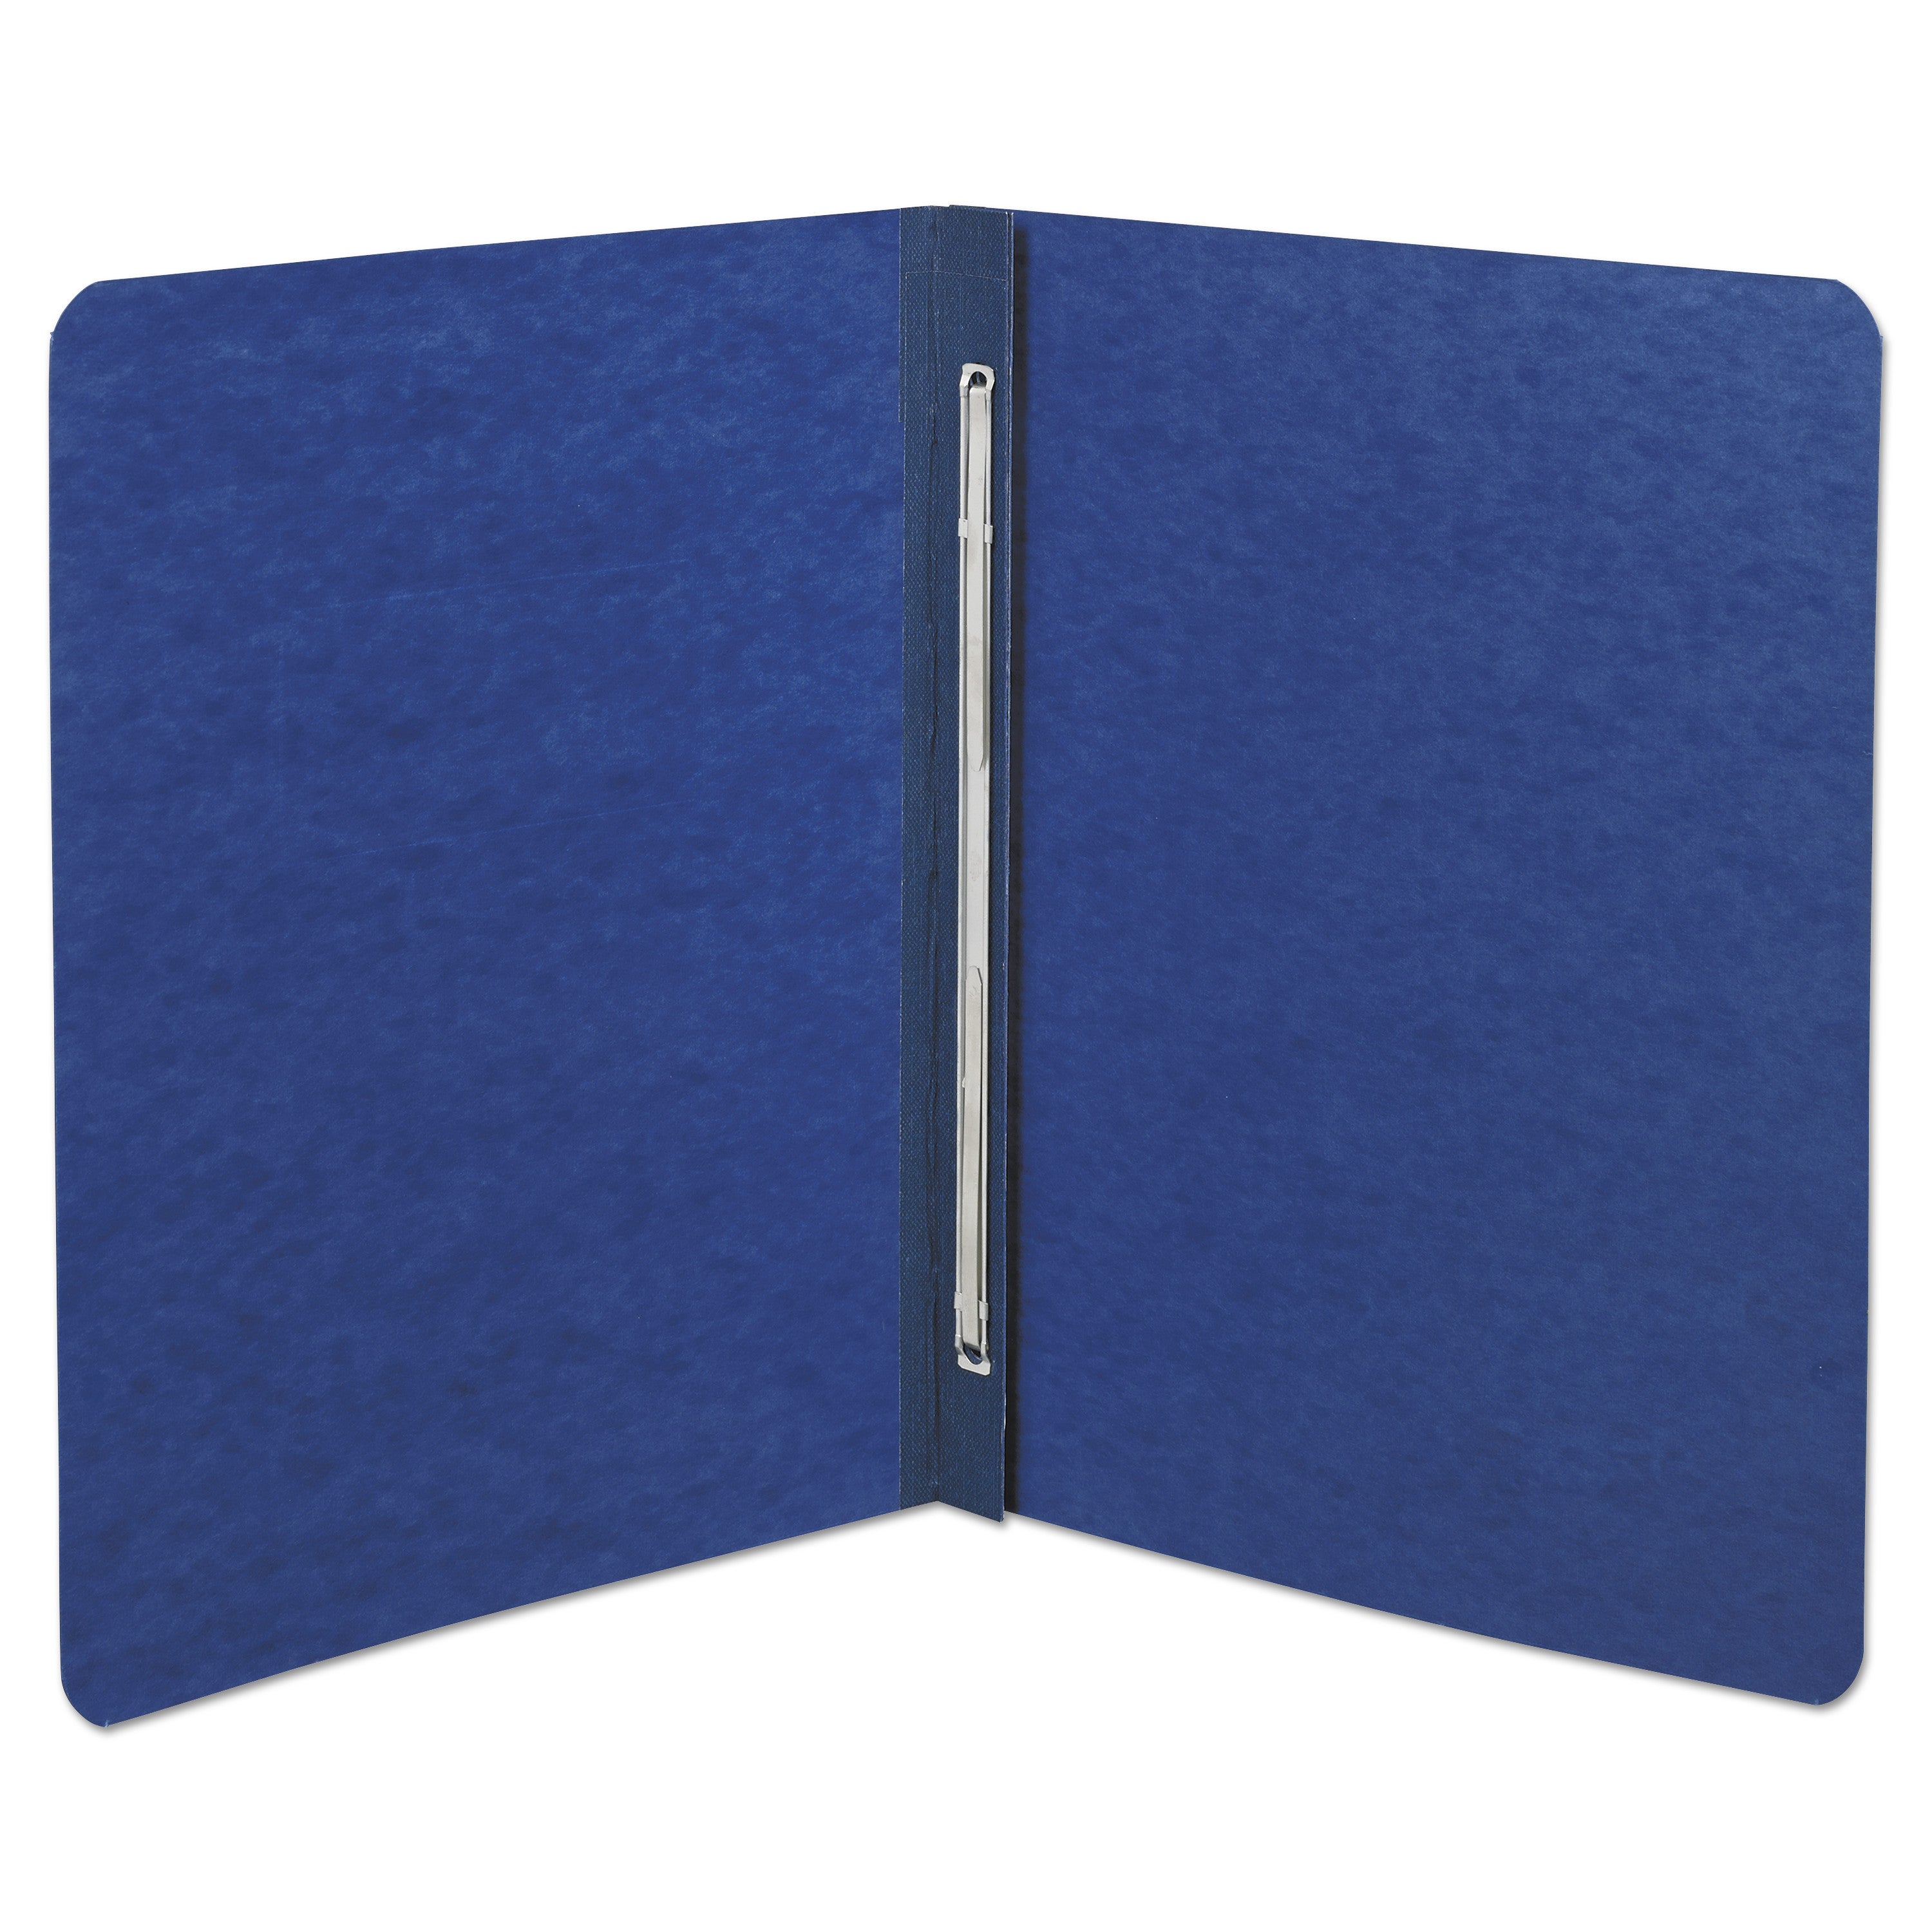 PRESSTEX Report Cover with Tyvek Reinforced Hinge, Side Bound, Two-Piece Prong Fastener, 3" Capacity, 8.5 x 11, Dark Blue - 